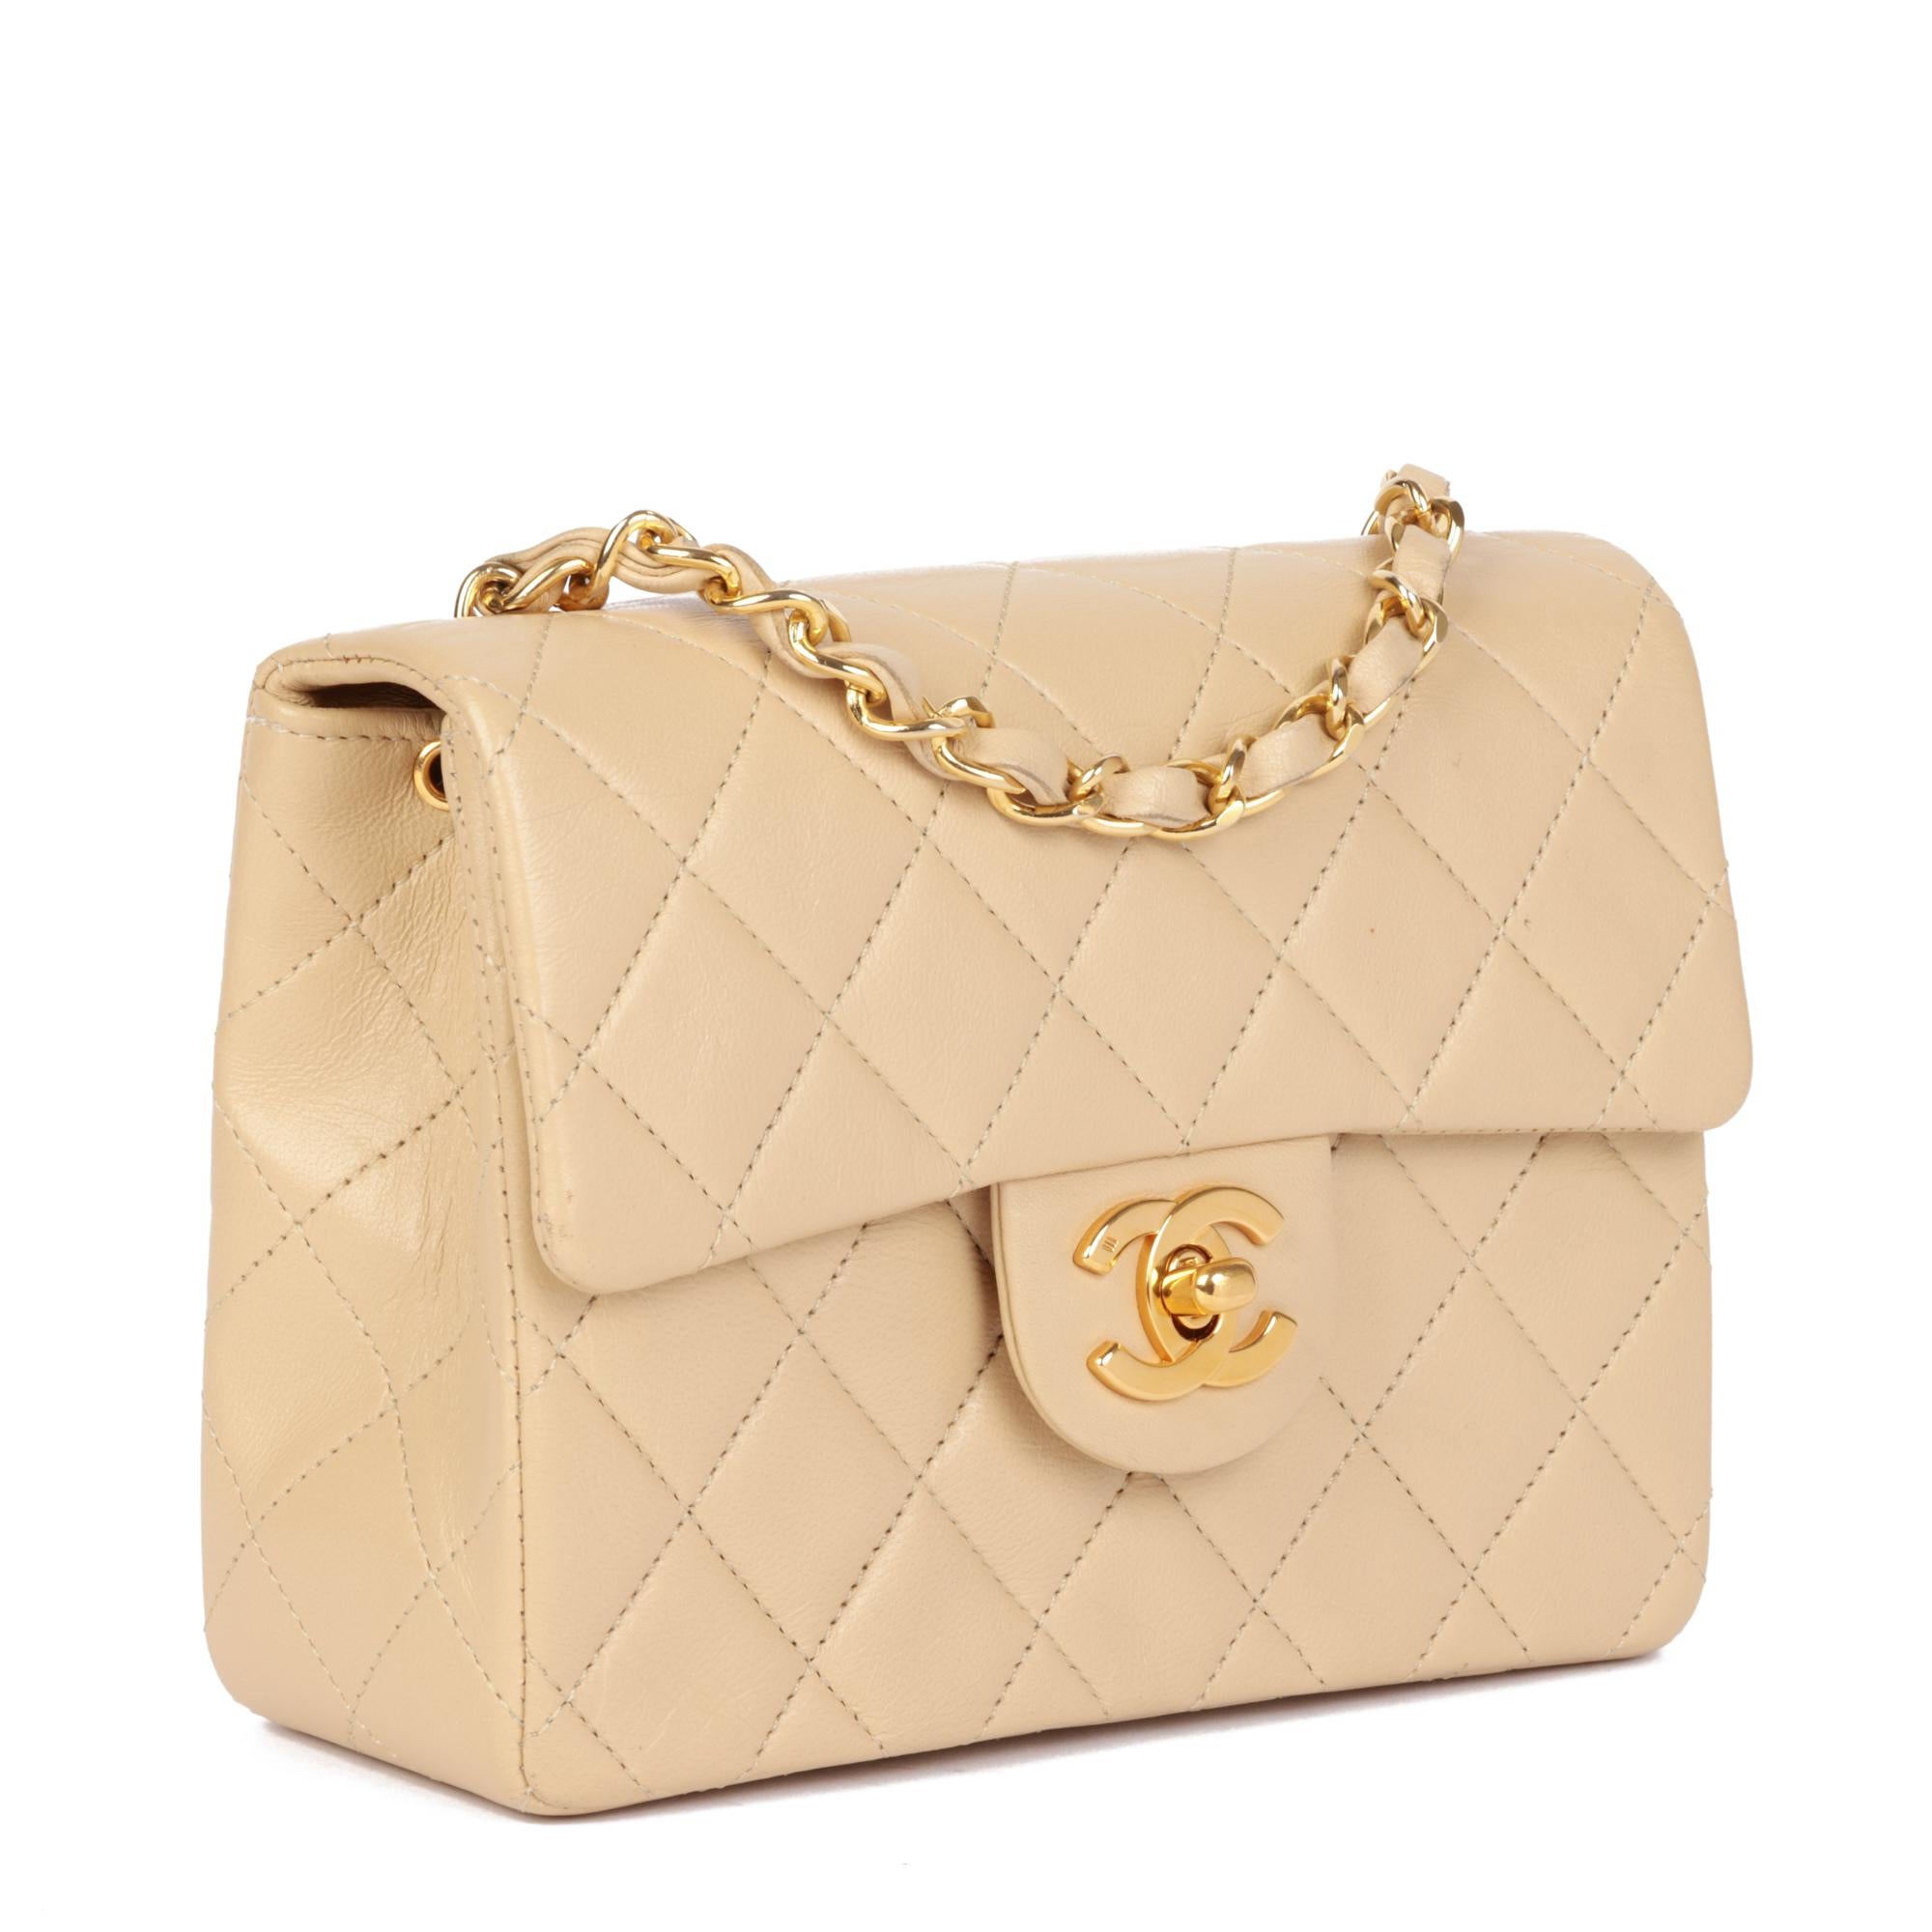 CHANEL
Beige Quilted Lambskin Vintage Square Mini Flap Bag

Serial Number: 1191025
Age (Circa): 1990
Accompanied By: Chanel Dust Bag, Protective Felt 
Authenticity Details: Serial Sticker (Made in France)
Gender: Ladies
Type: Shoulder,